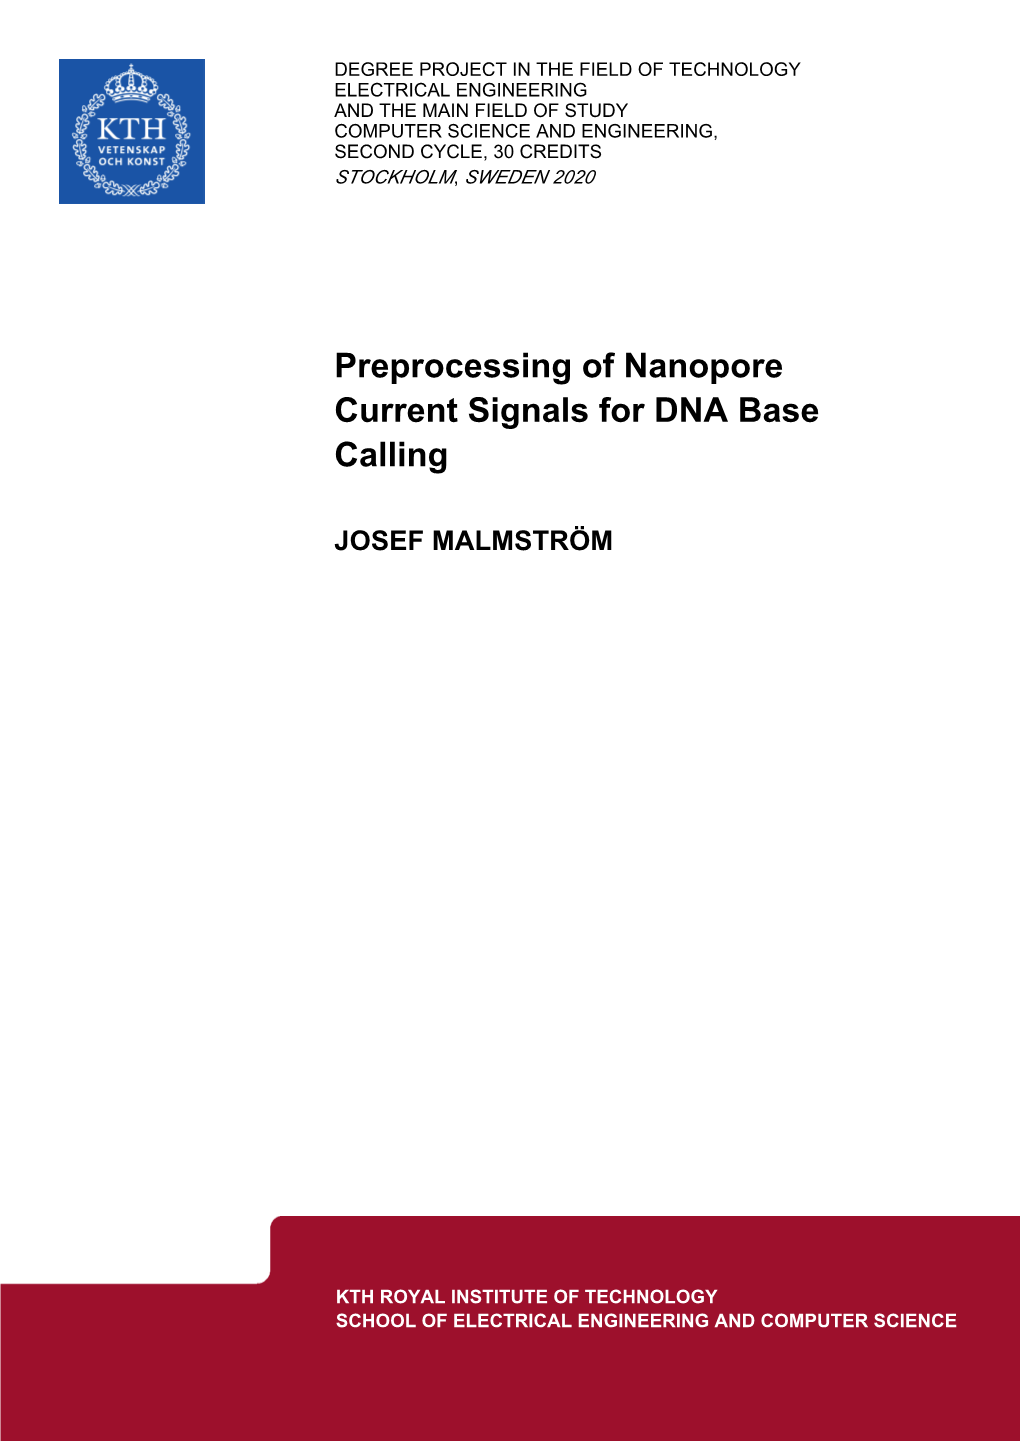 Preprocessing of Nanopore Current Signals for DNA Base Calling